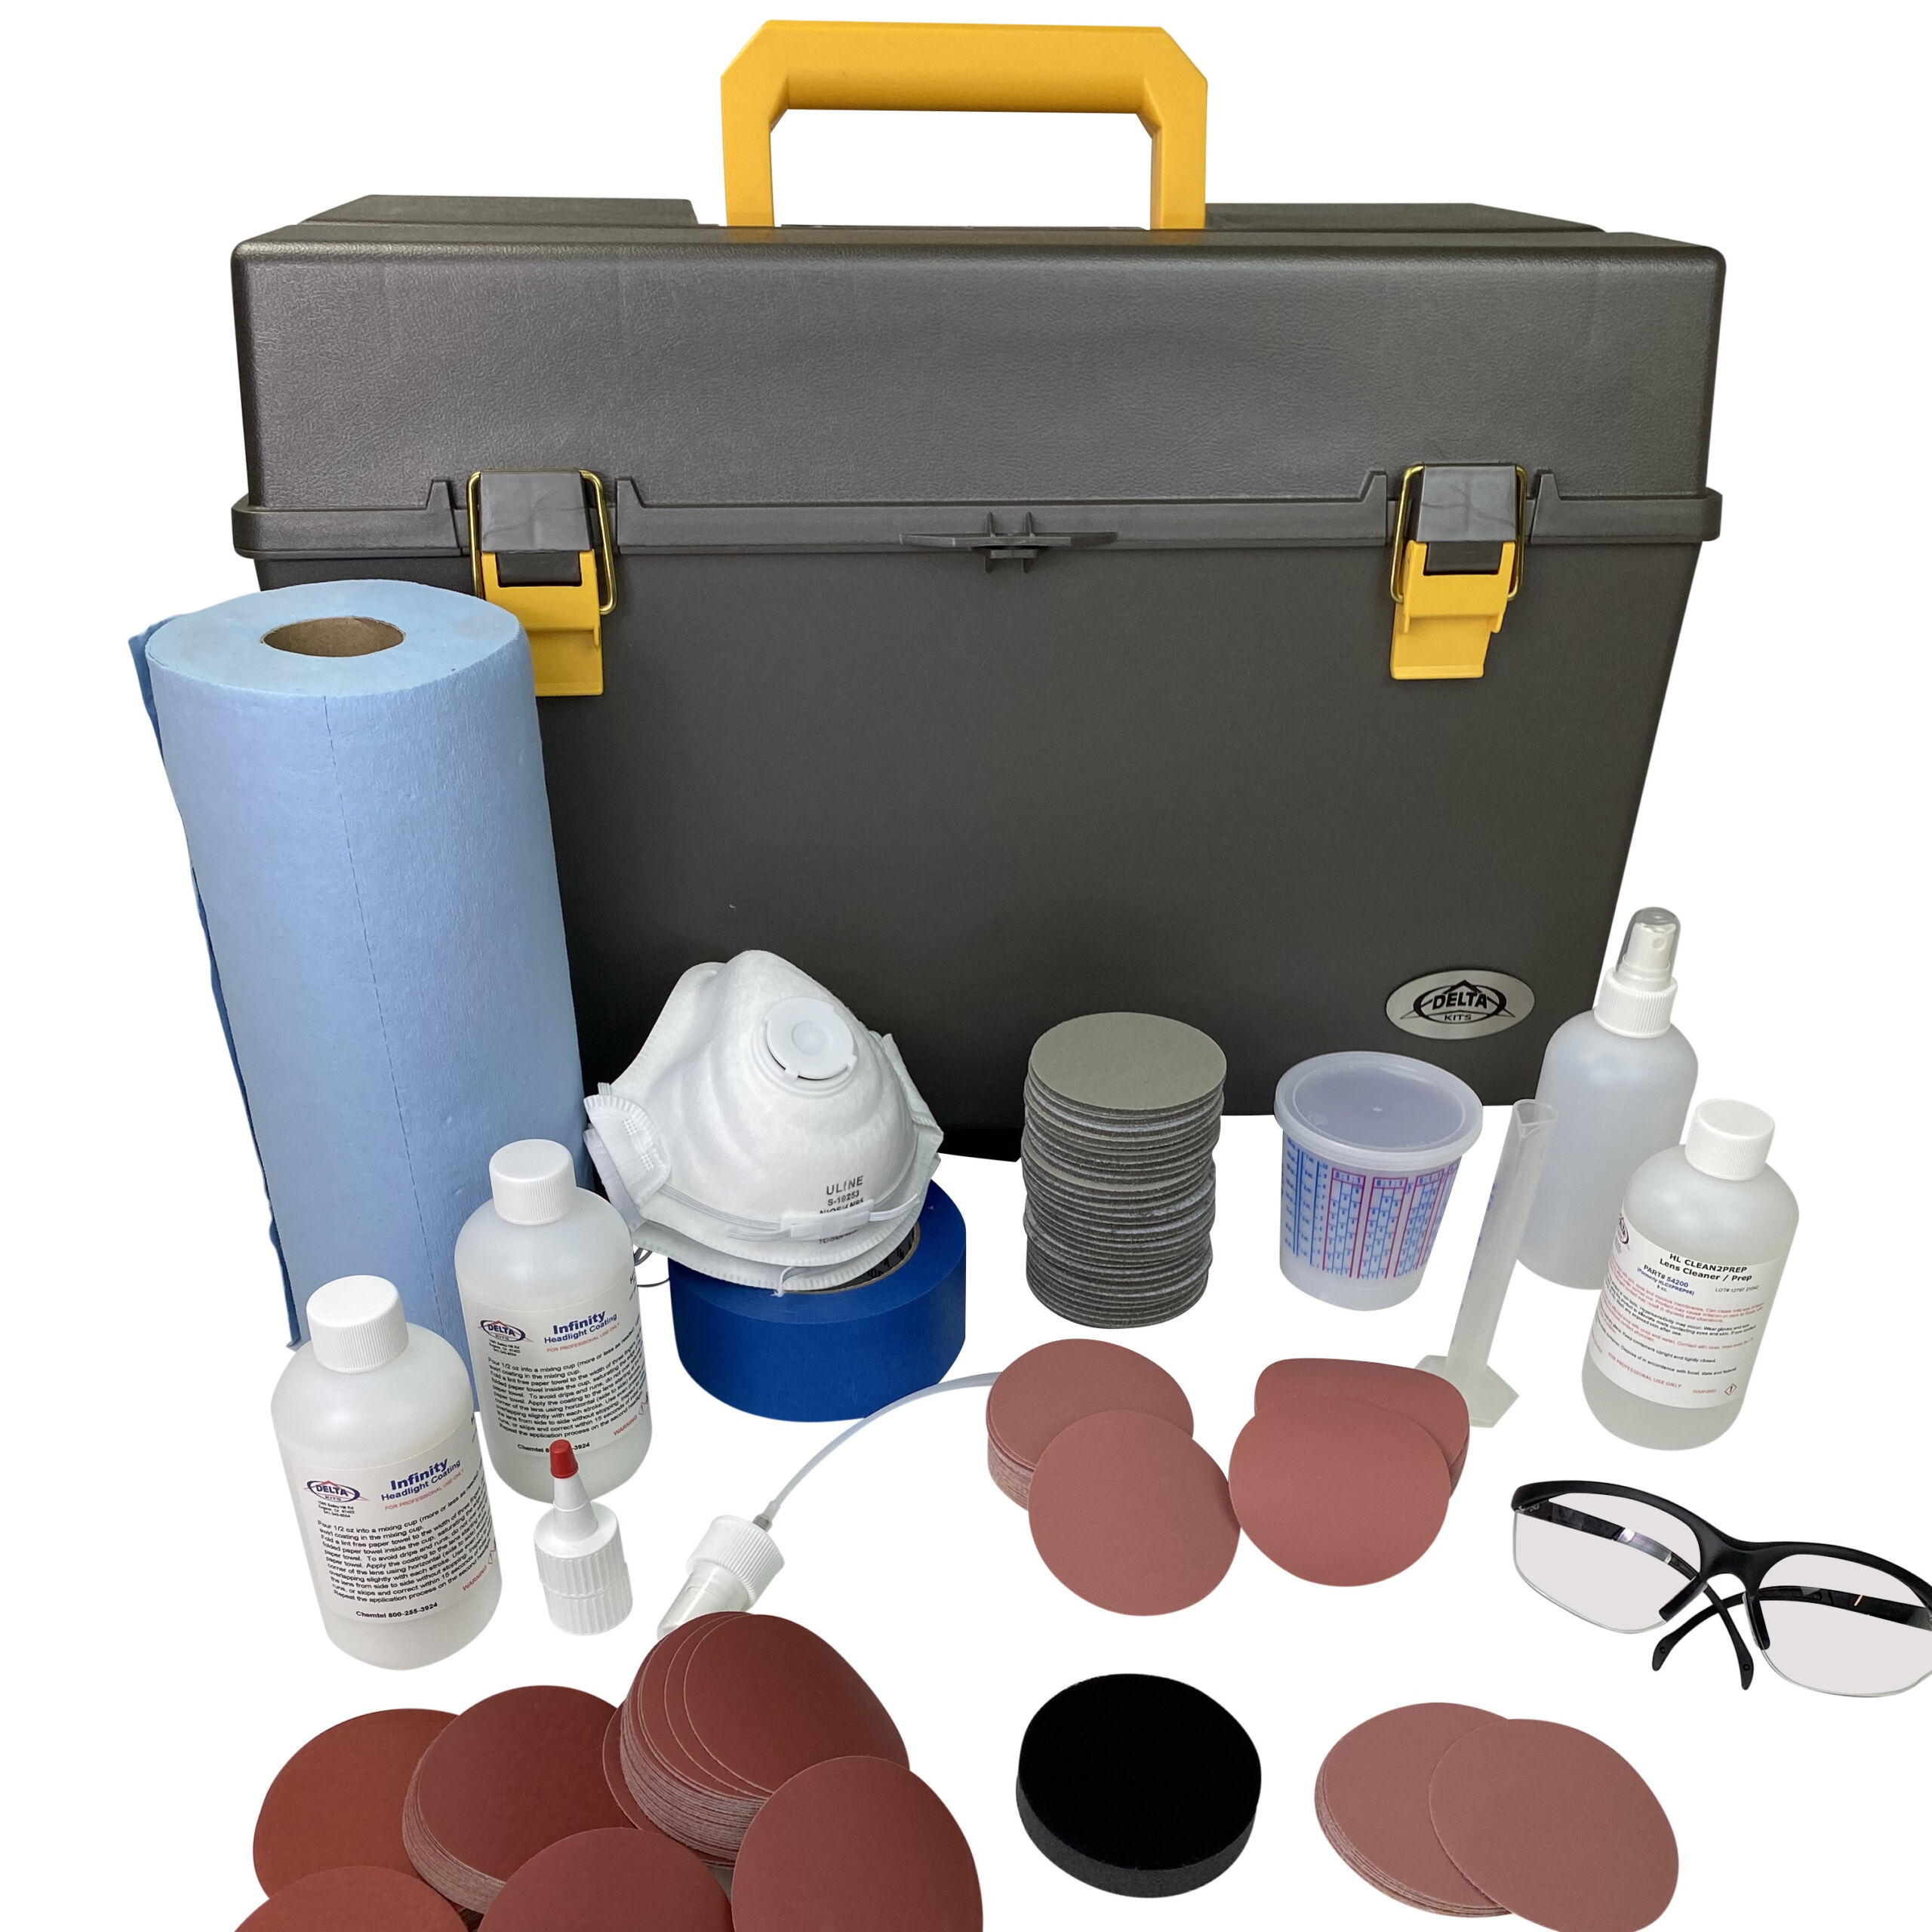 Protected: ClearPro Kit Contents